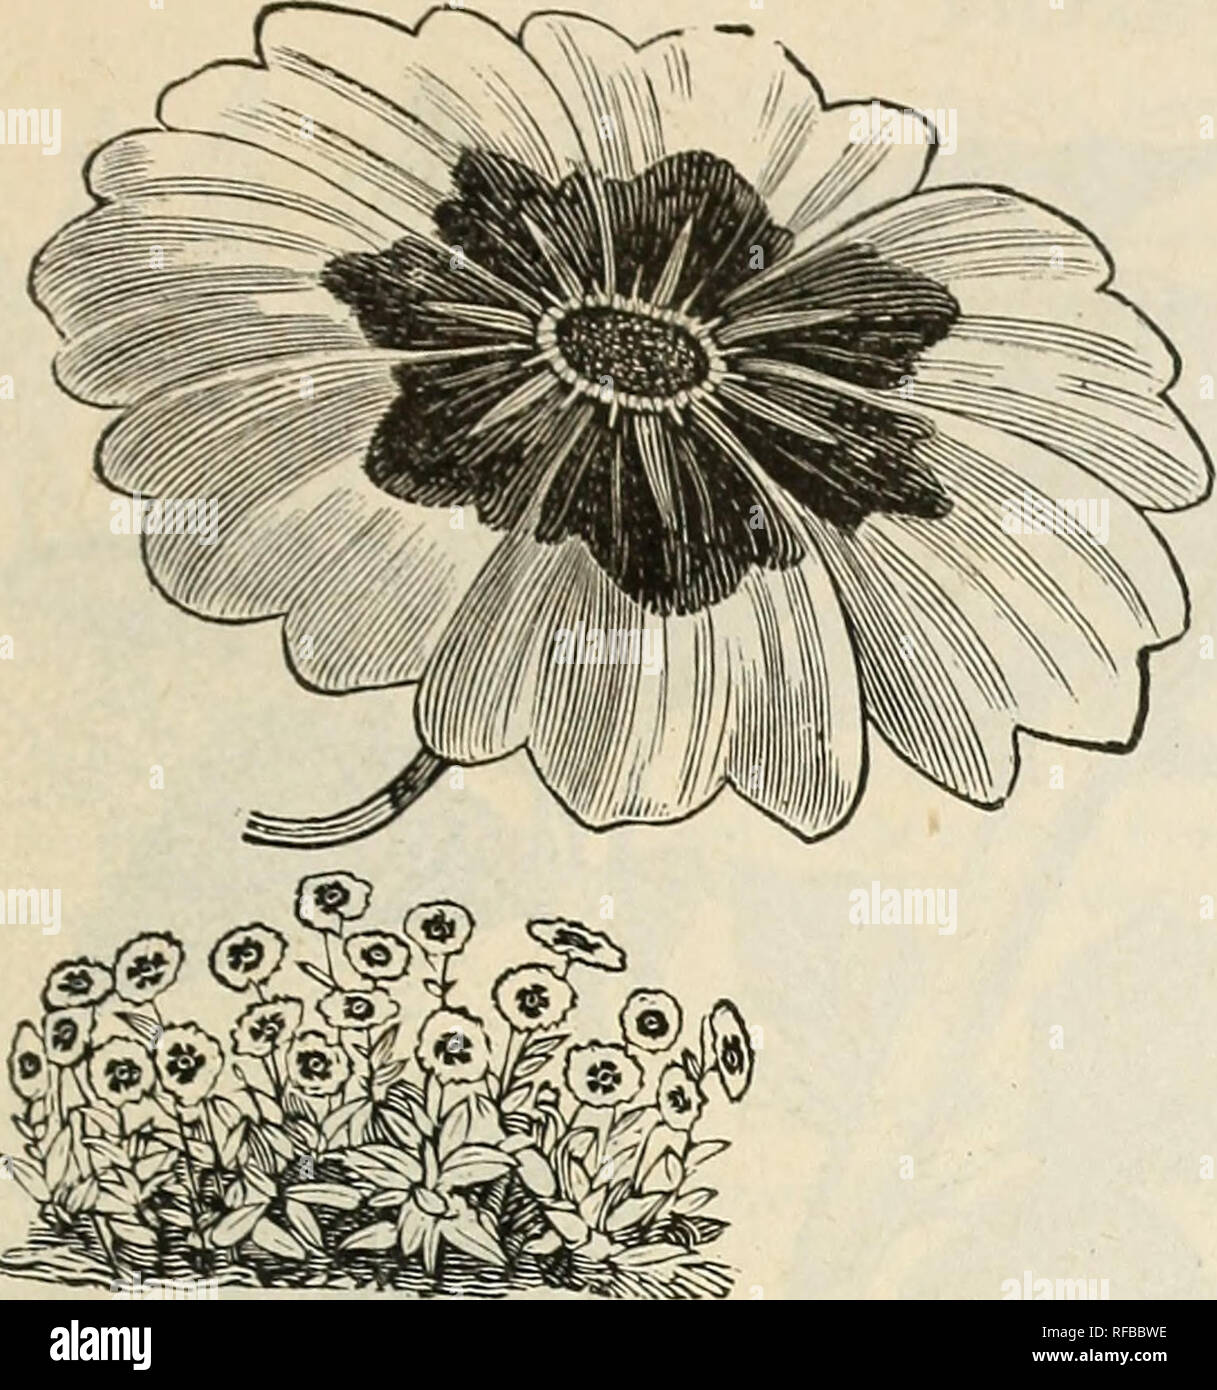 . Catalogue 1892 : tested seeds. Seeds Catalogs; Vegetables Seeds Catalogs; Flowers Seeds Catalogs; Fruit Seeds Catalogs; Nurseries (Horticulture) Catalogs. TESTED FLOWER SEEr)S. 55. COREOPSIS or CALLIOPSIS. COREOPSIS or CALLIOPSIS. Very showy, beautiful flowering plants; mainly hardy annuals; 1 to 2 ft. 3511. Atkinsoni. A beautiful biennial; blooming the first season. Yellow and brown; 2 ft. Pkt., 5c. 2513. Bicolor. Golden yellow; centre brown: IVk ft. Pkt., 5c. 3513. (^oroiiatii. Yellow crown flower; 1ft. .1. Pkt., 5c. 3514. Druniinondii. Yellow and red ; very flne; IV2 ft. A. Pkt,, 5c. 2515 Stock Photo